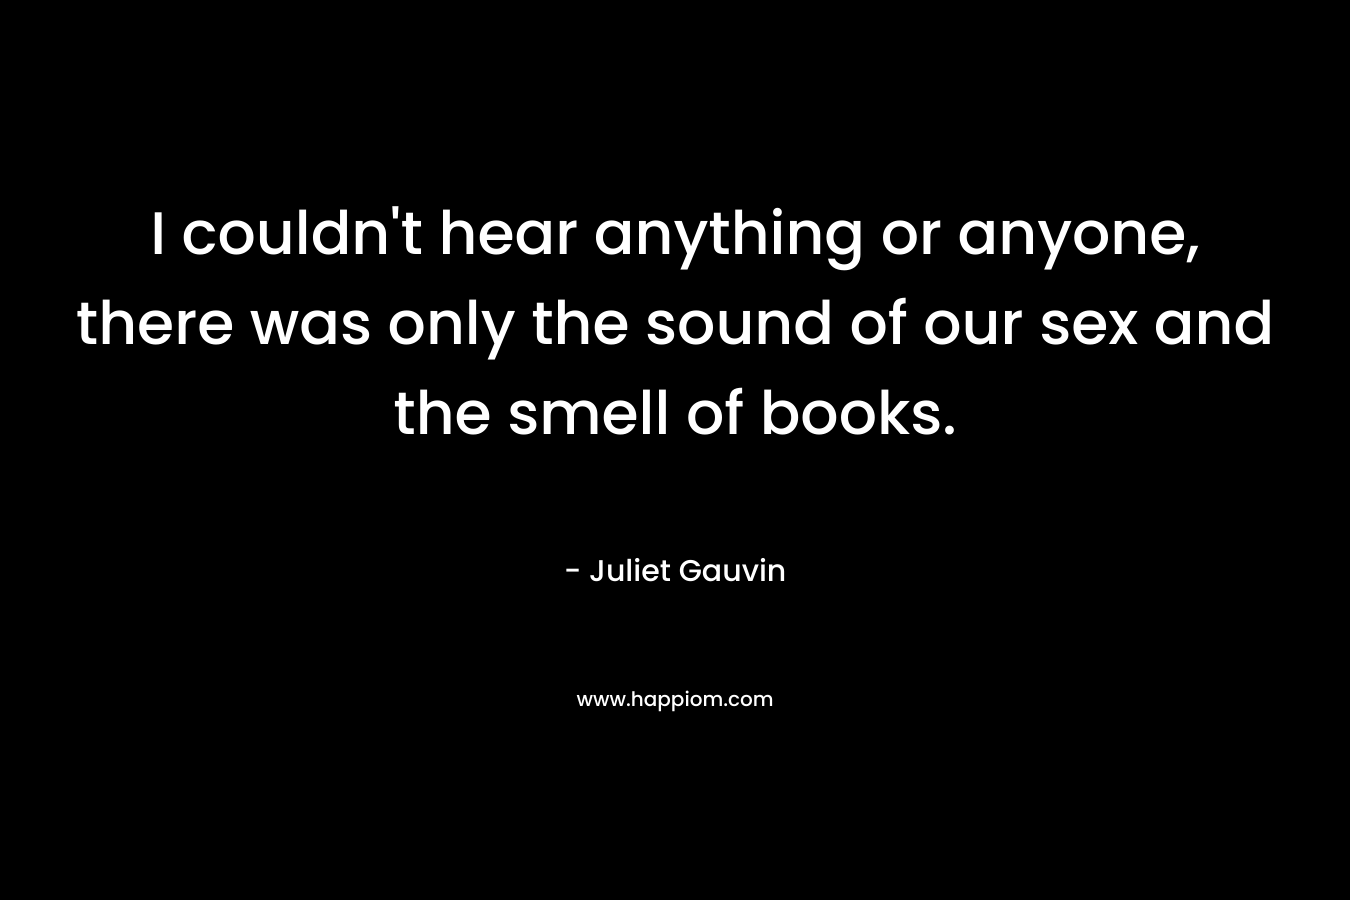 I couldn’t hear anything or anyone, there was only the sound of our sex and the smell of books. – Juliet Gauvin